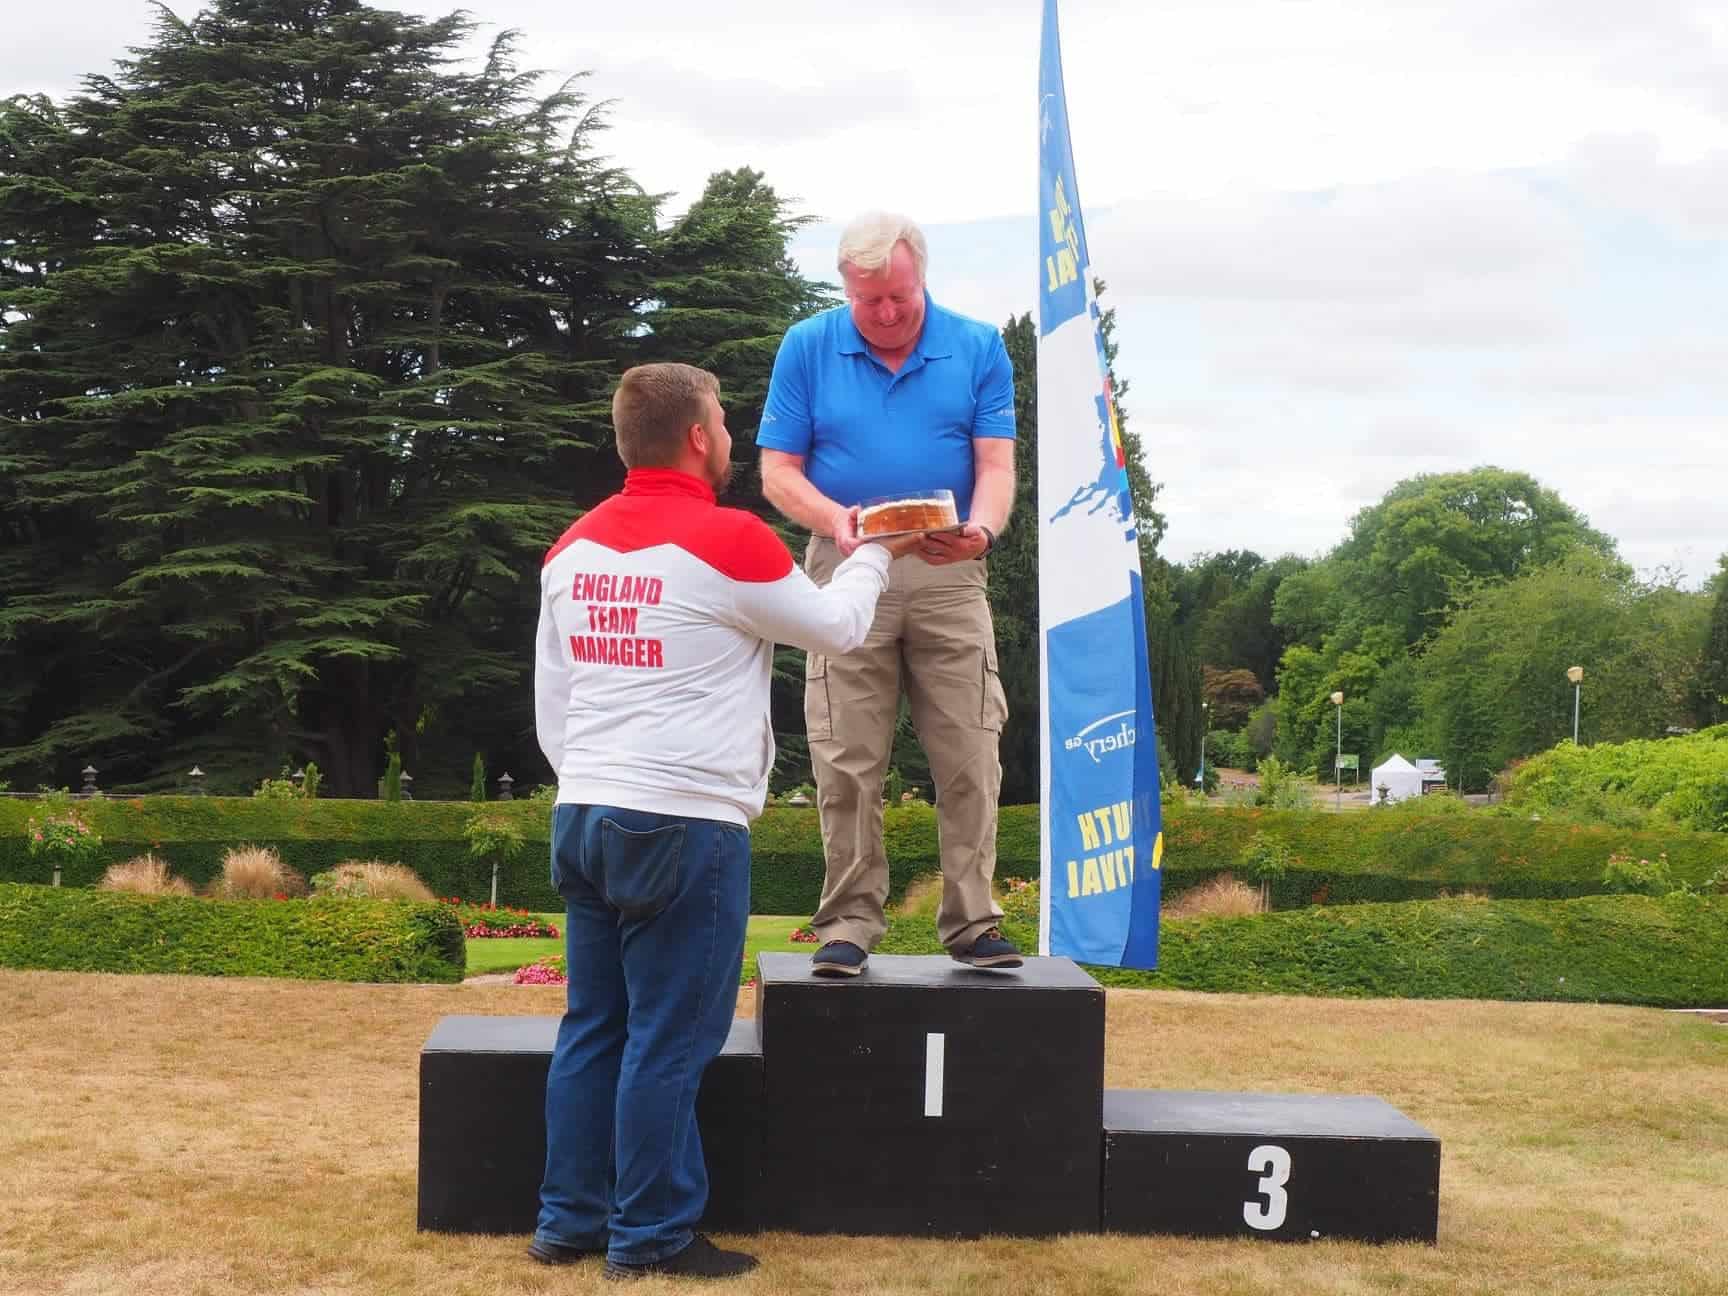 A tribute to former Archery GB Chair Dave Harrison